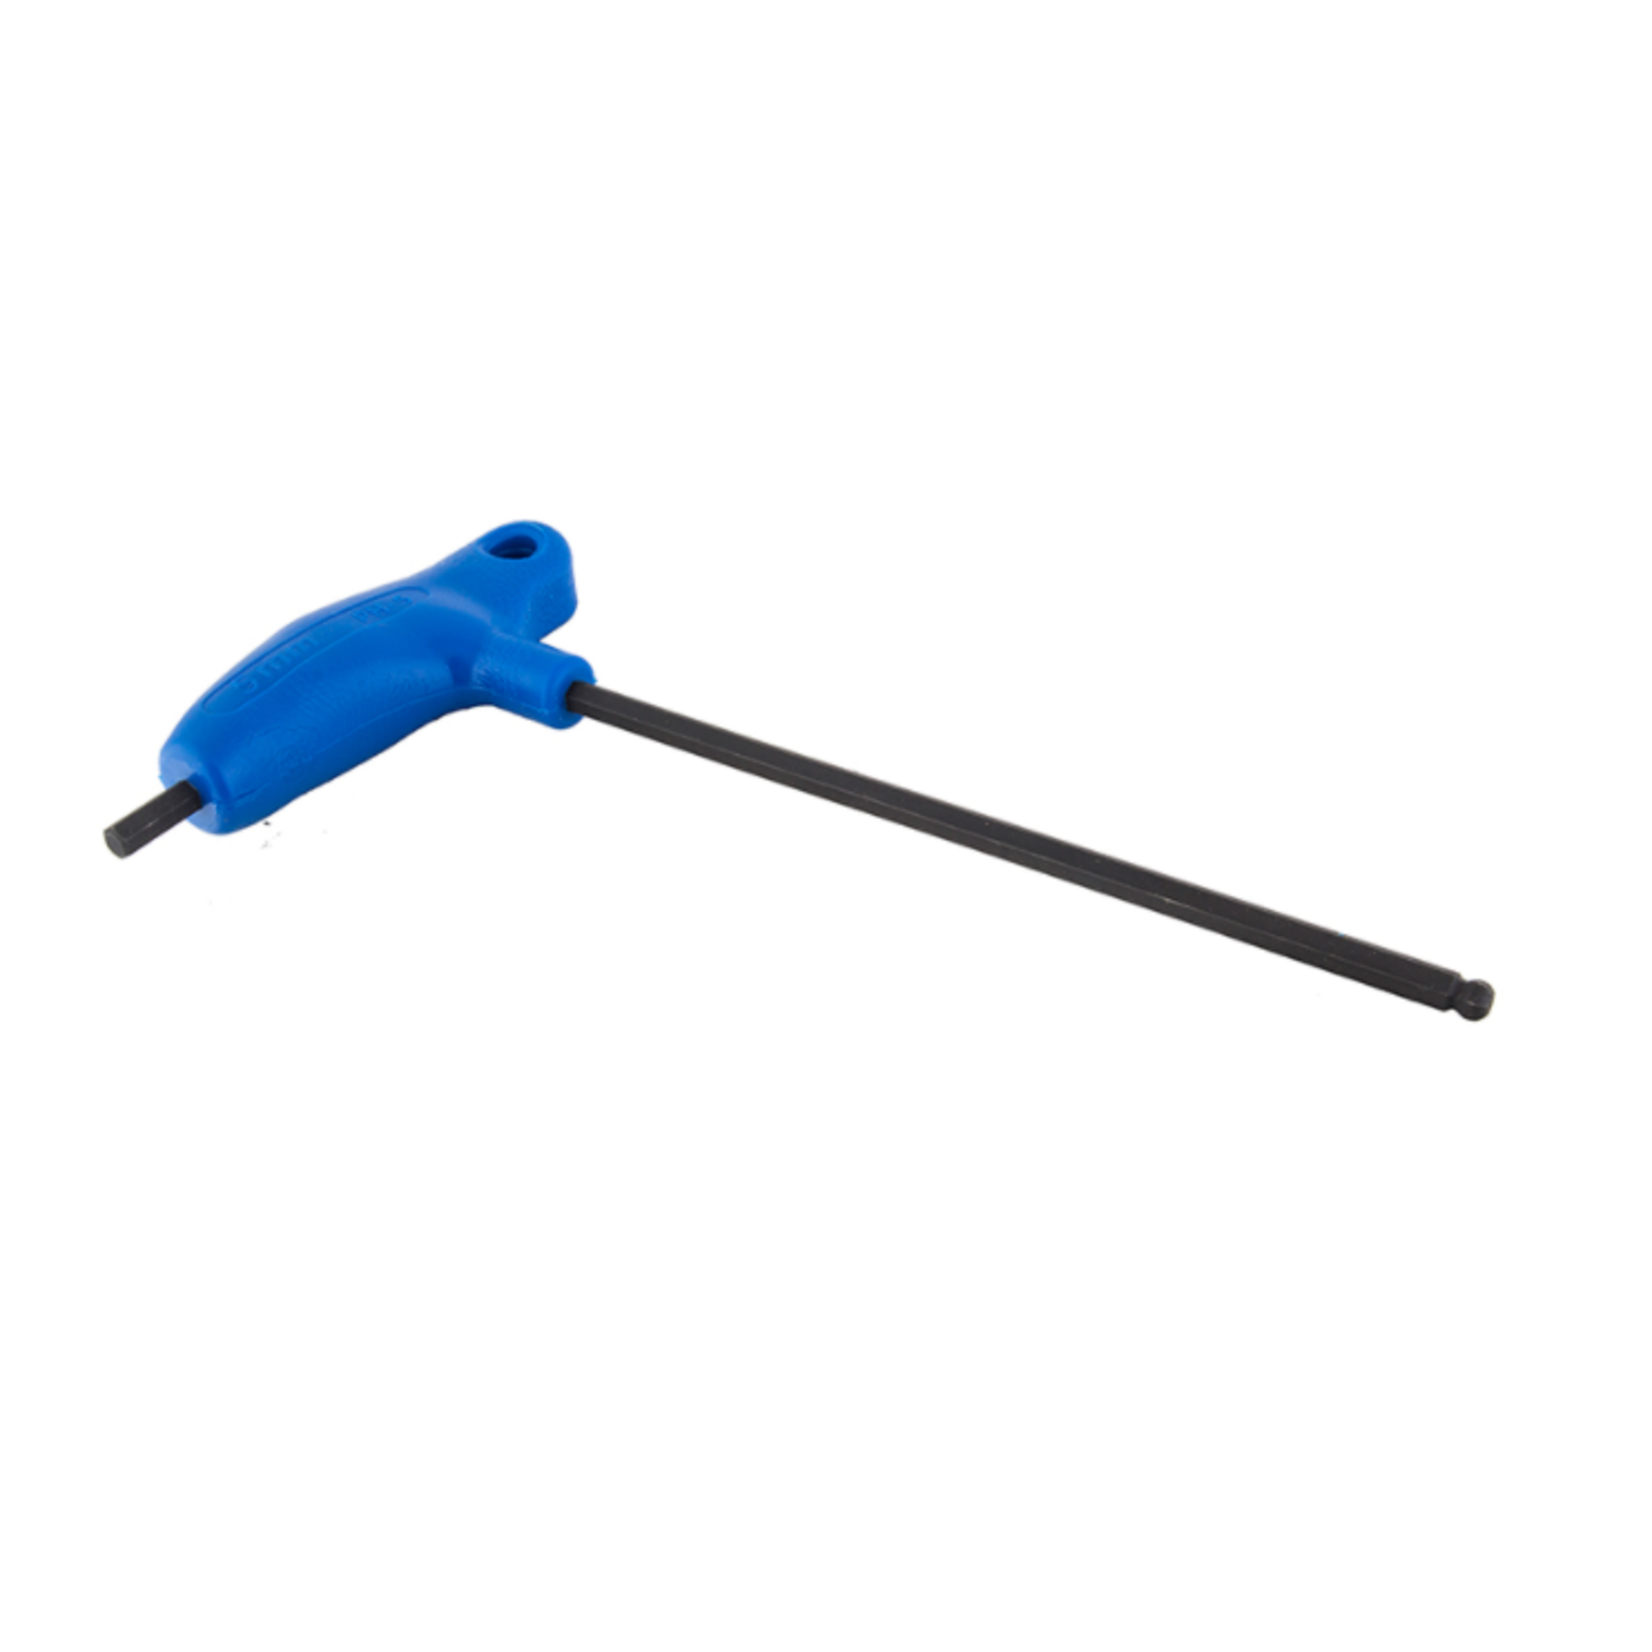 Park Tool Park Tool Allen Wrench PH-5 5mm